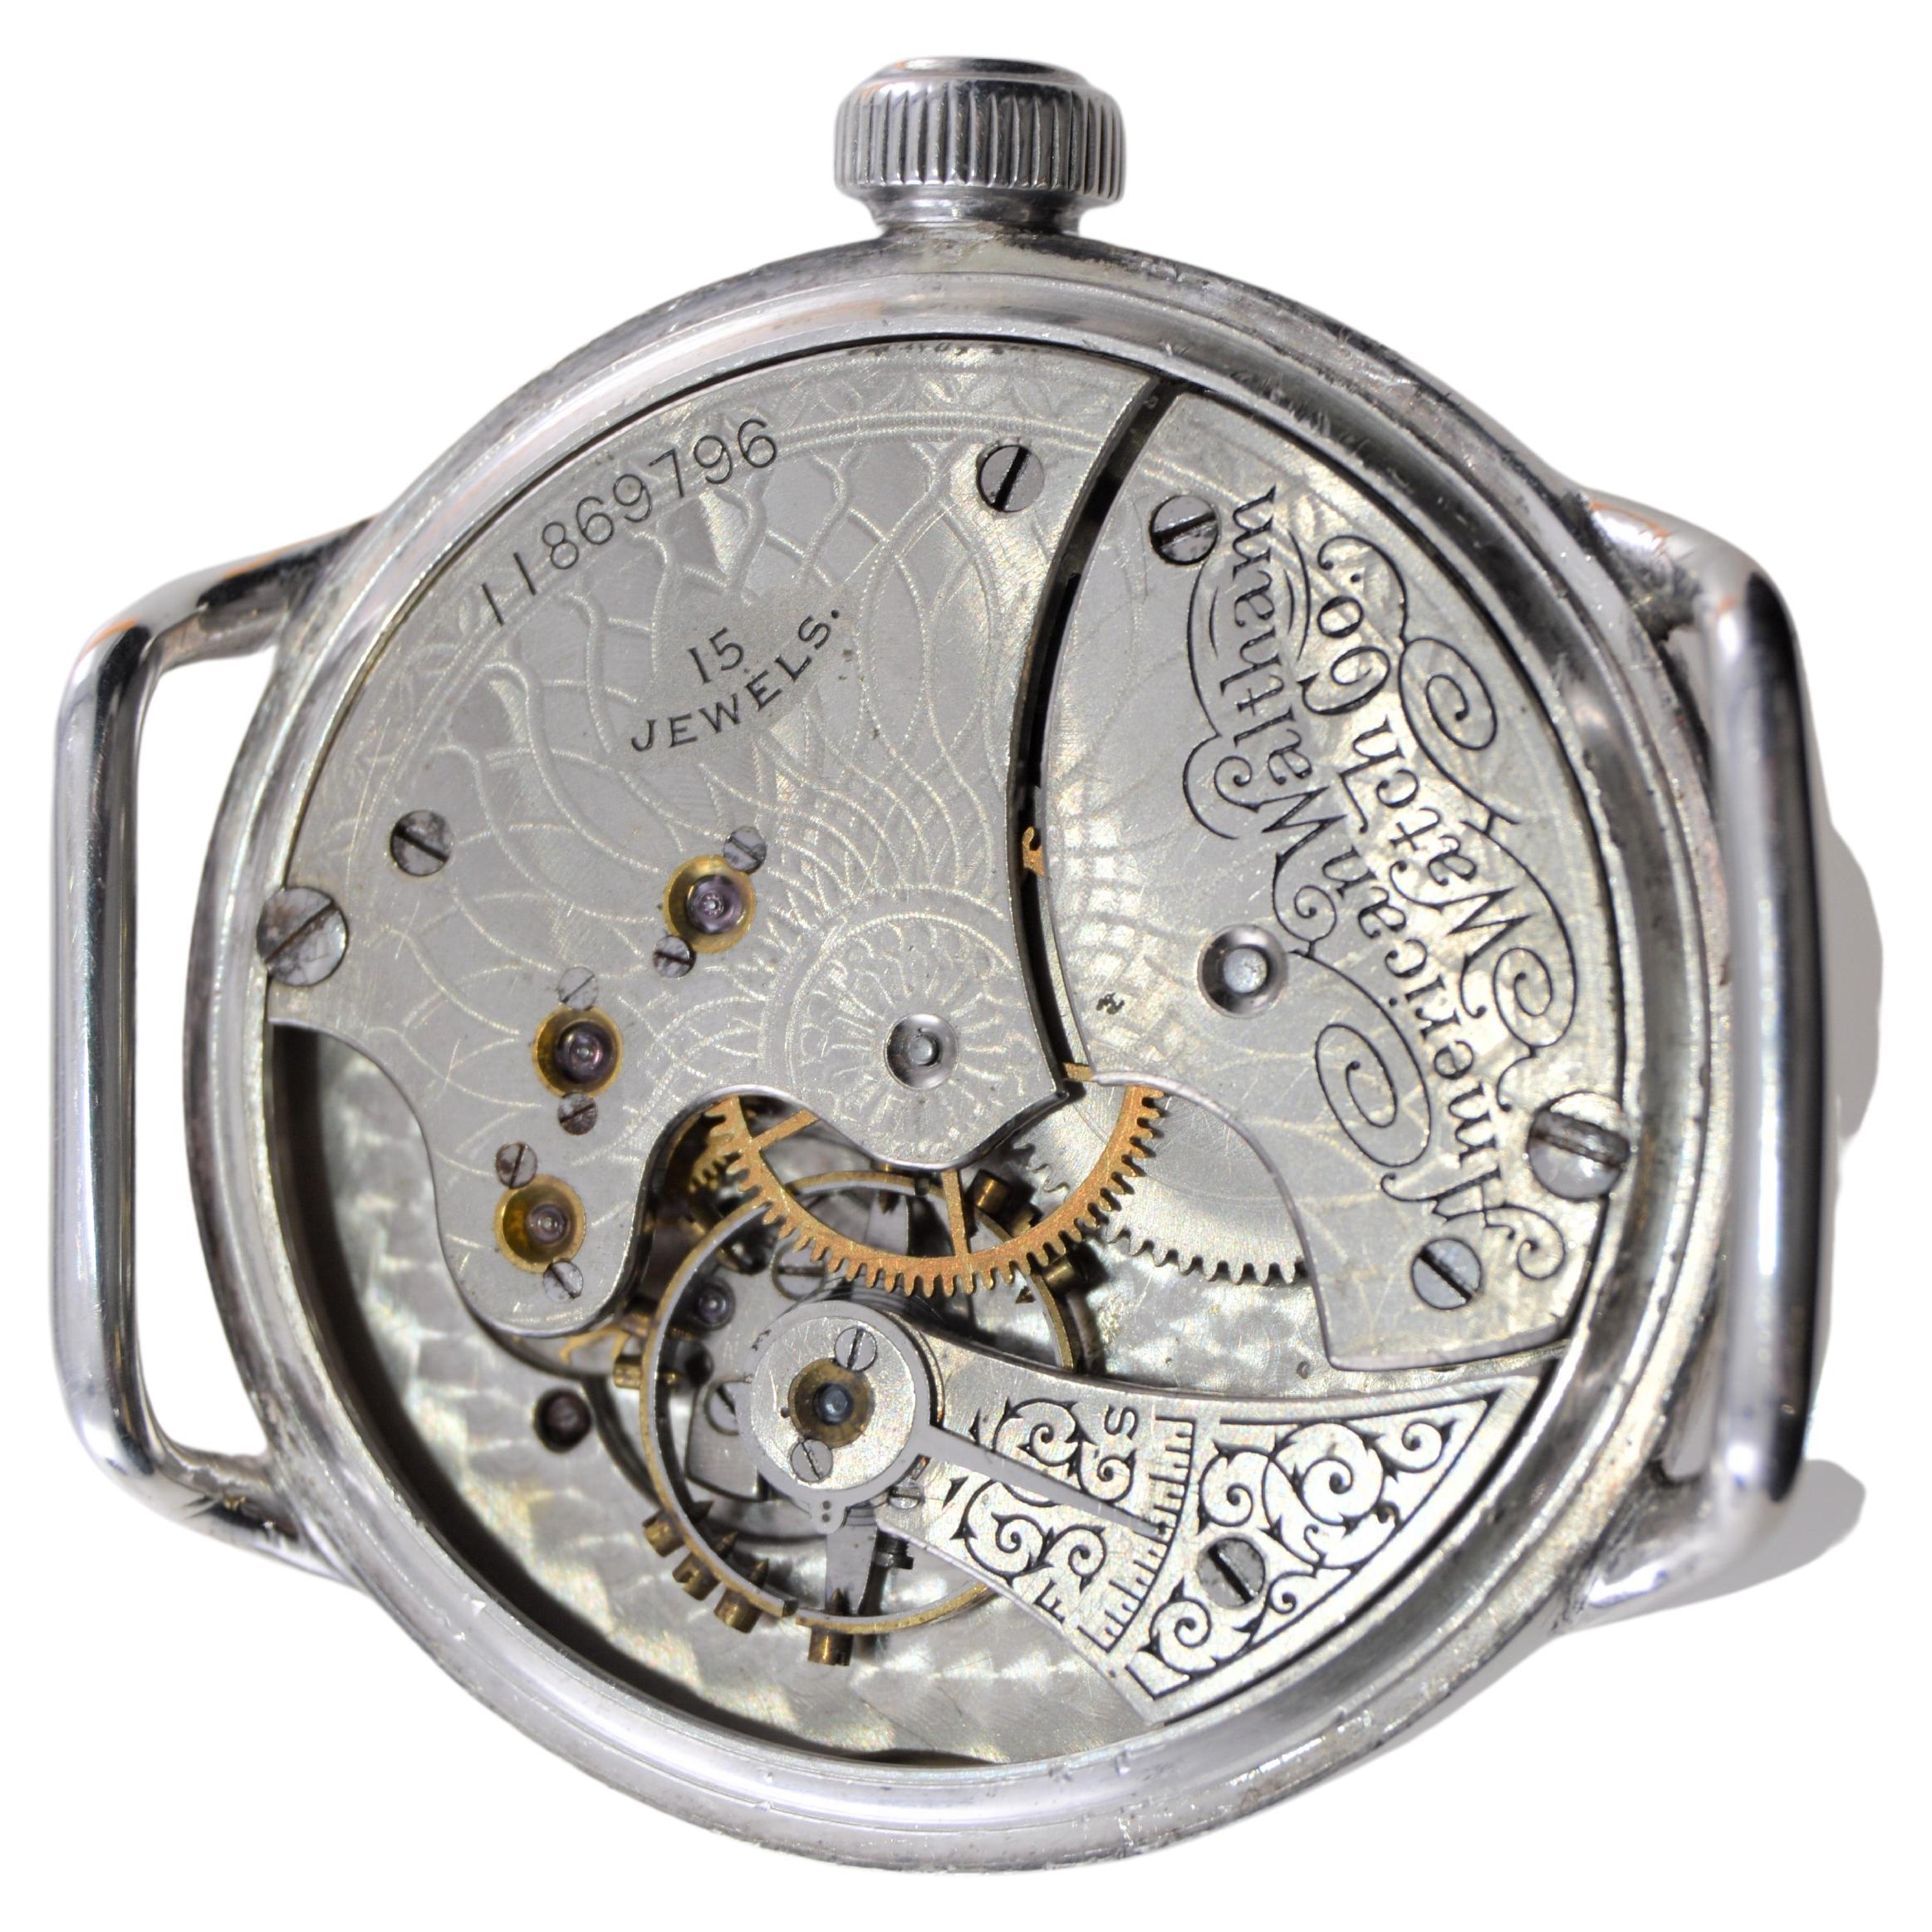 Waltham Sterling Silver Campaign Style Watch from 1901 with Original Enamel Dial 5